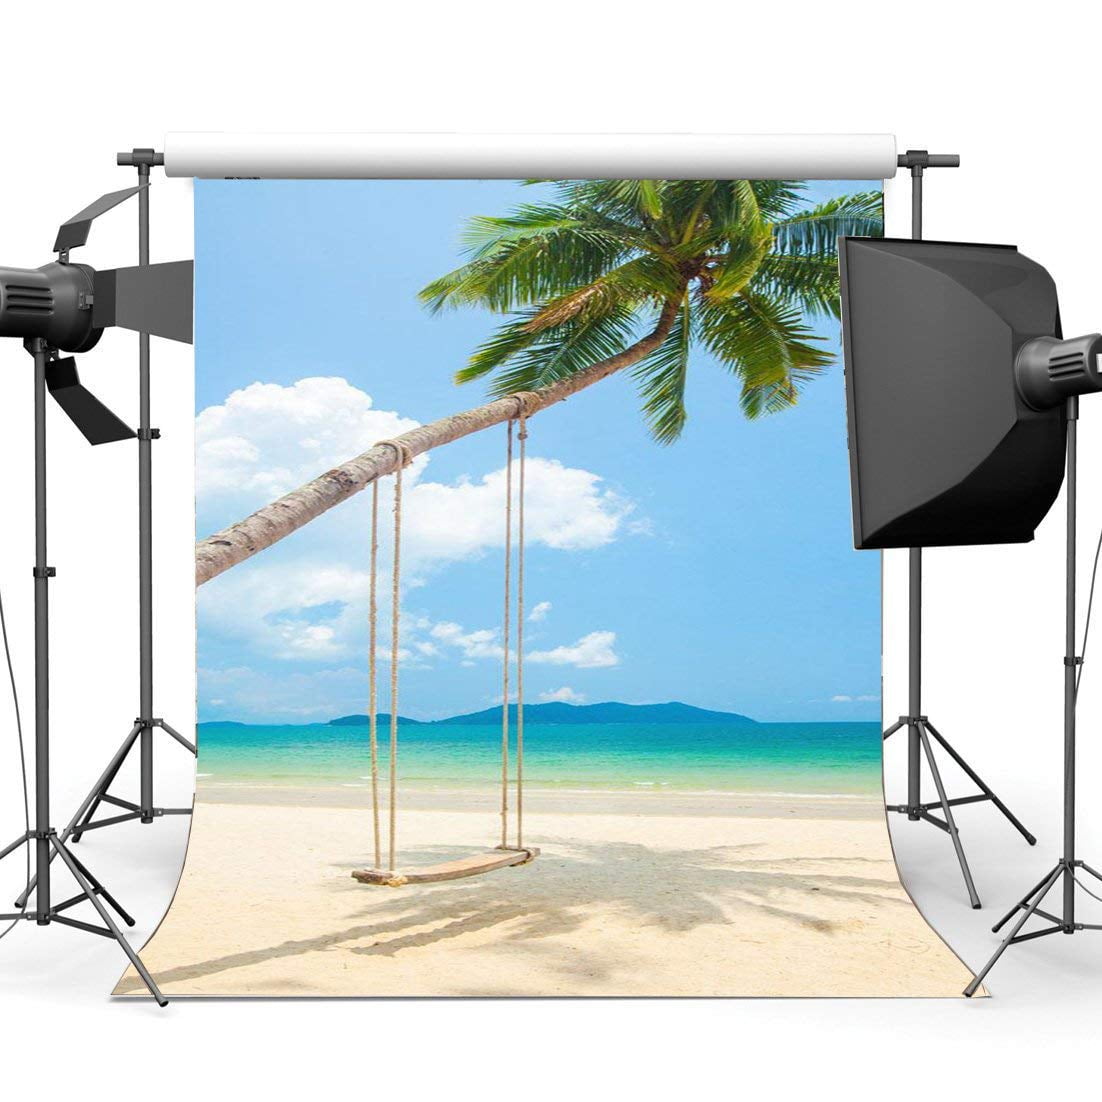 Zhy 5X7FT Sea Sandbeach Background Cartoon Summer Vacation Theme Party Photography Backdrop Starfish Tropical Coconut Trees Hot Air Balloons Steamship Photoshooting Studio Props 068 